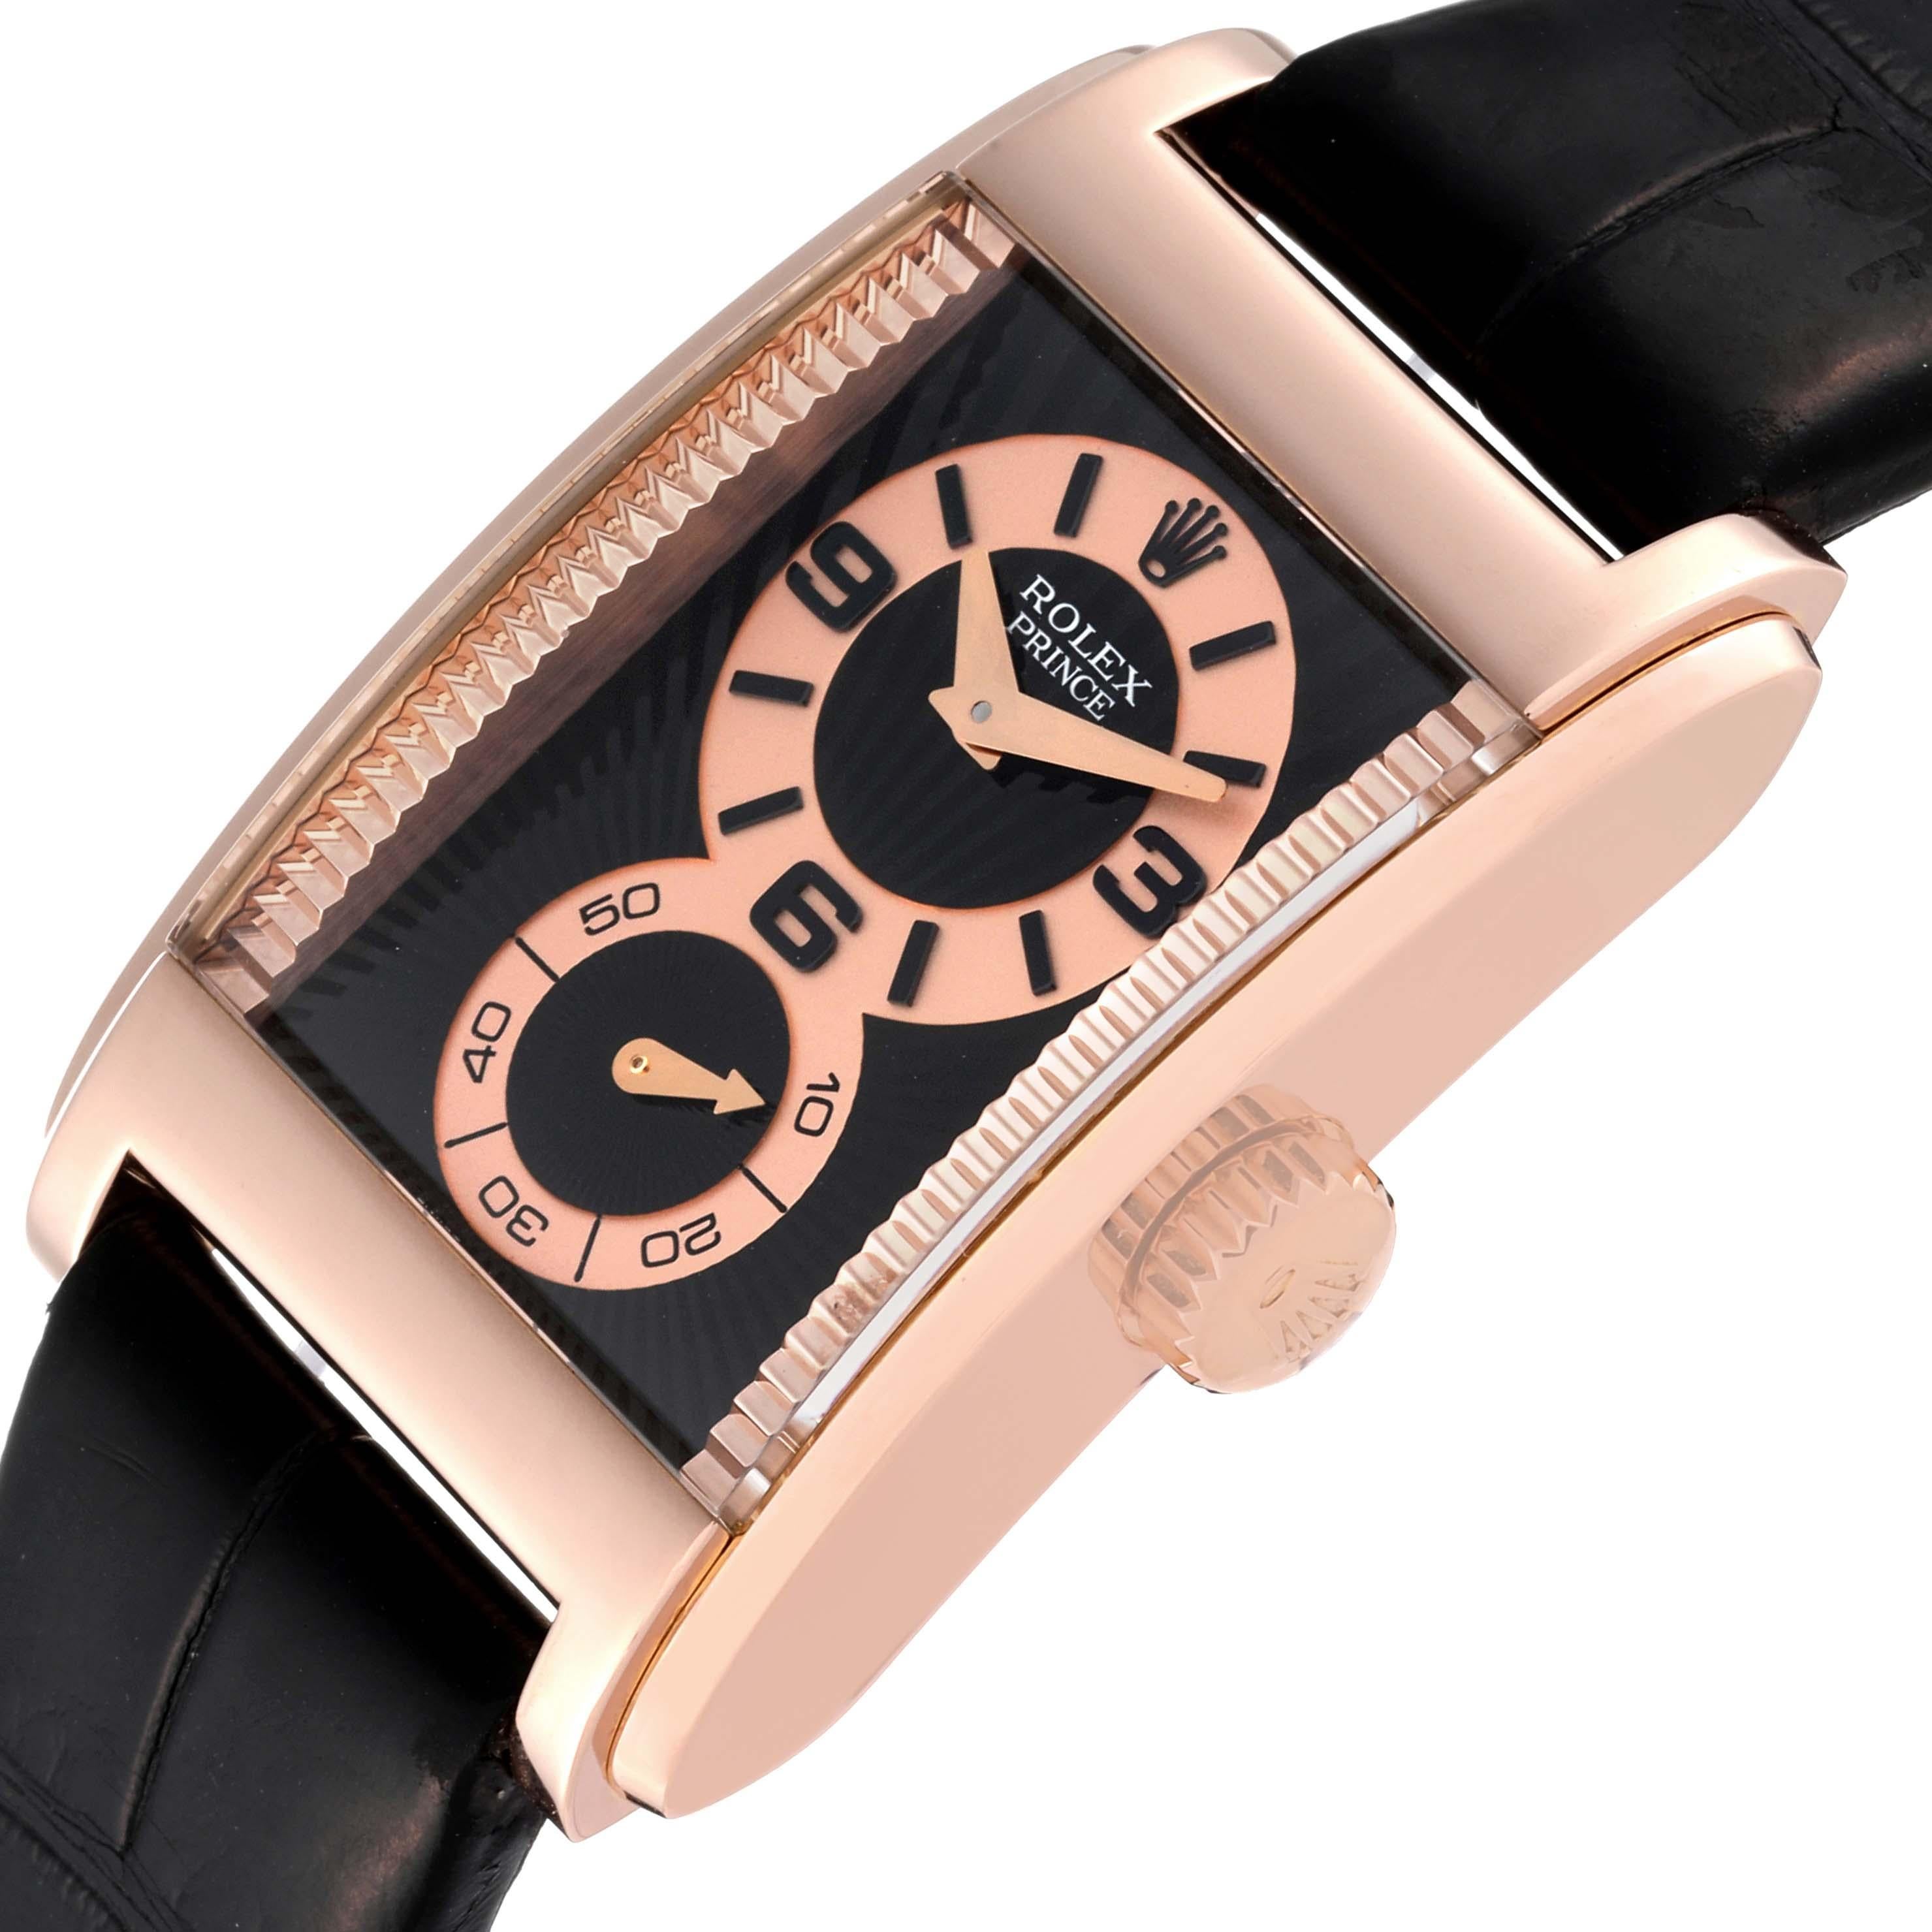 Rolex Cellini Prince Rose Gold Black Dial Leather Strap Mens Watch 5442 Box Card 1